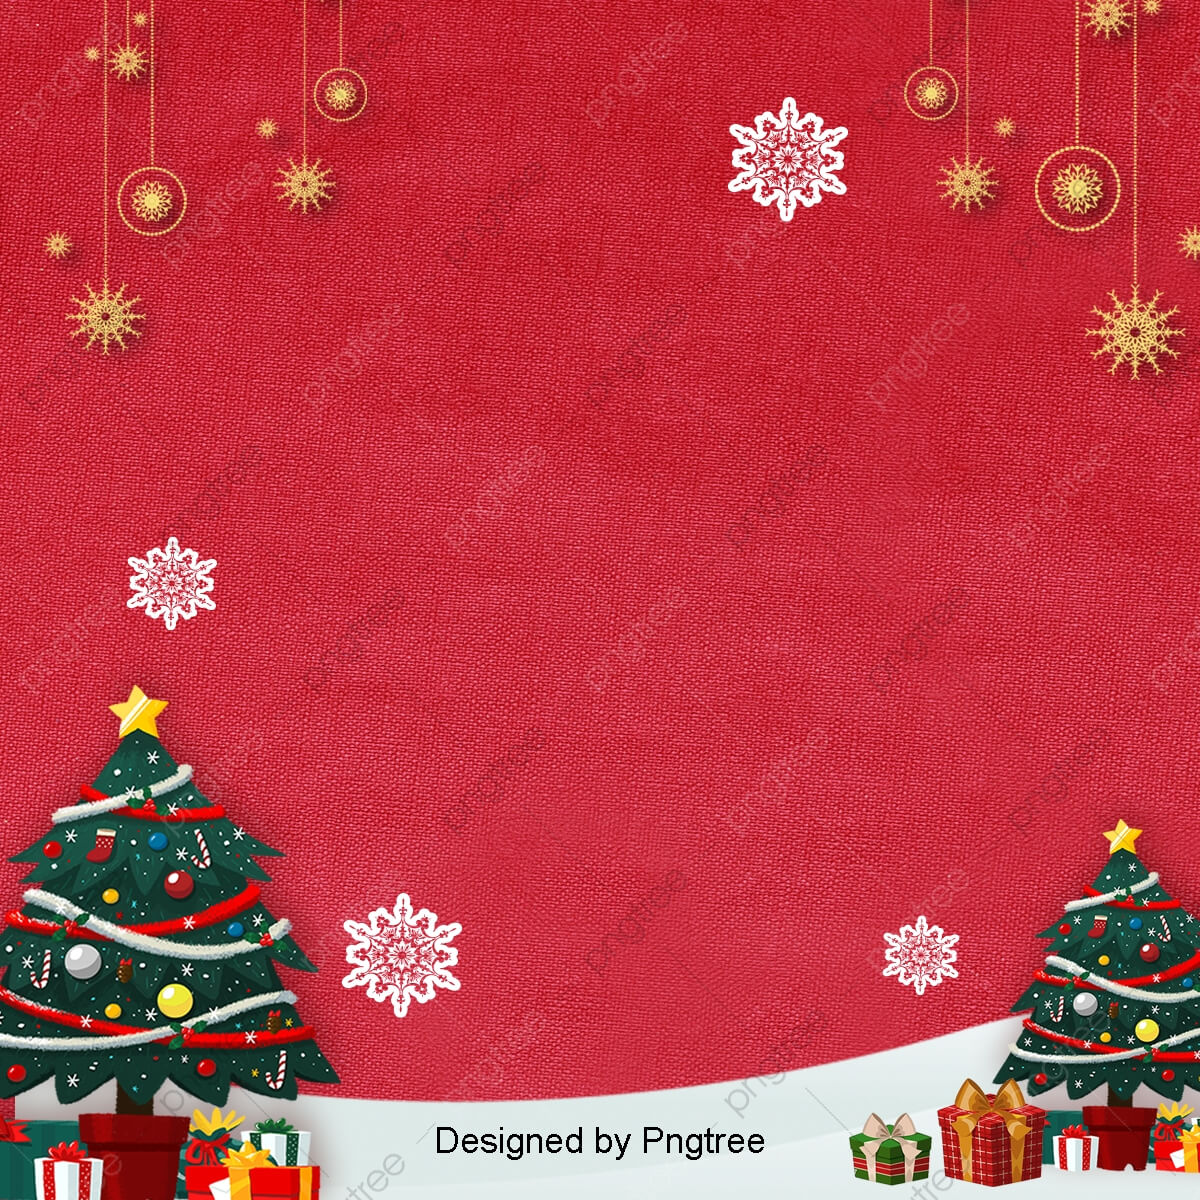 Red Retro Cartoon Christmas Card Background, View, Christmas Intended For Free Christmas Card Templates For Photoshop